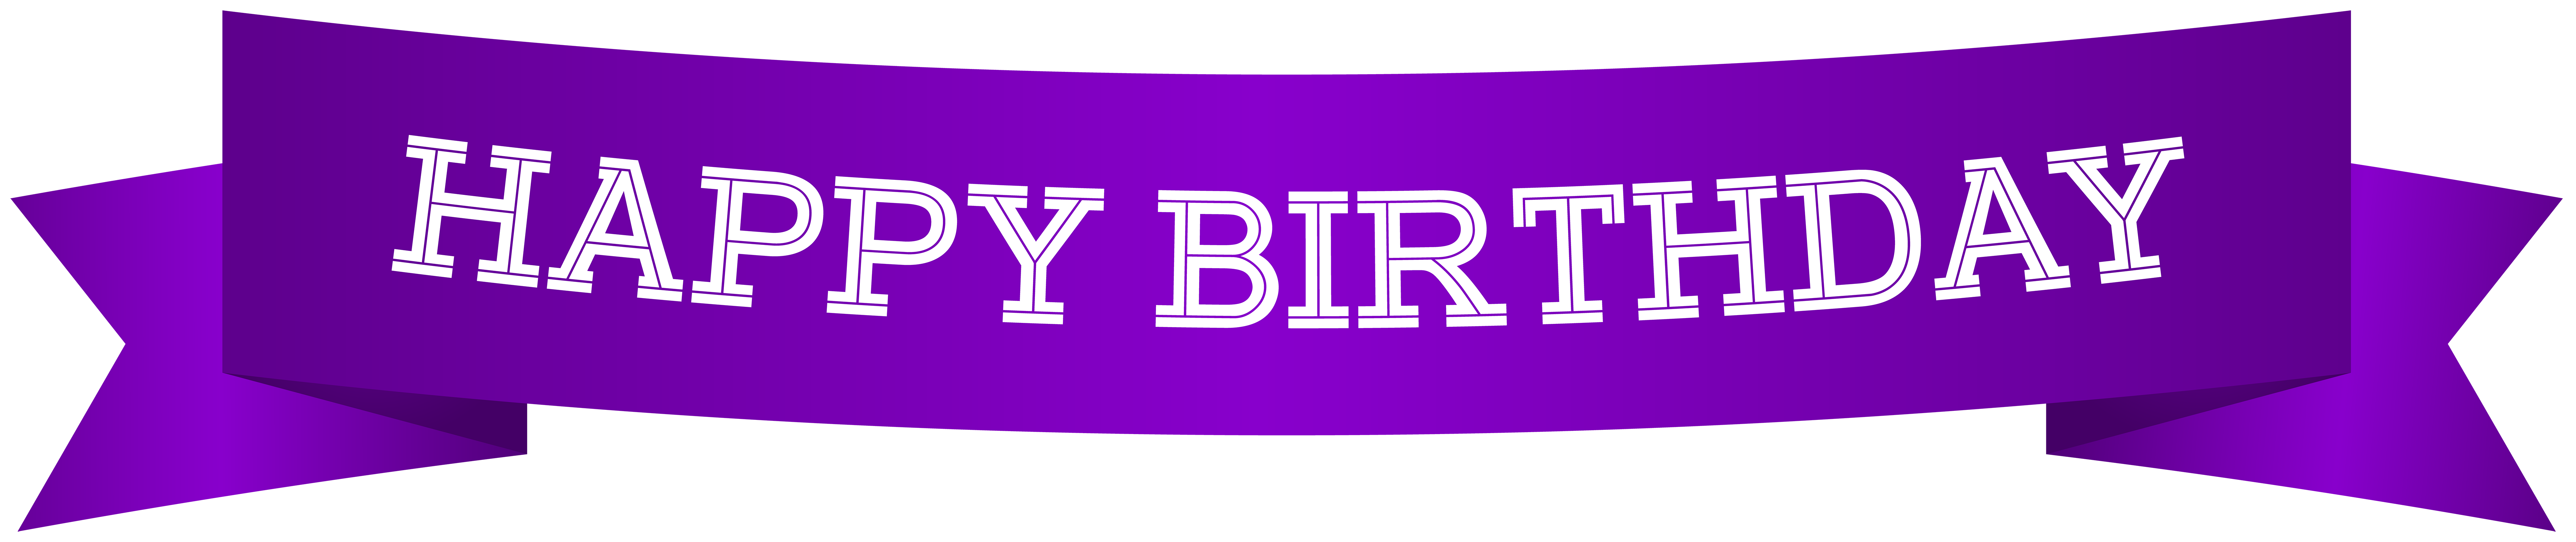 happy-birthday-banner-purple-png-clip-art-image-gallery-yopriceville